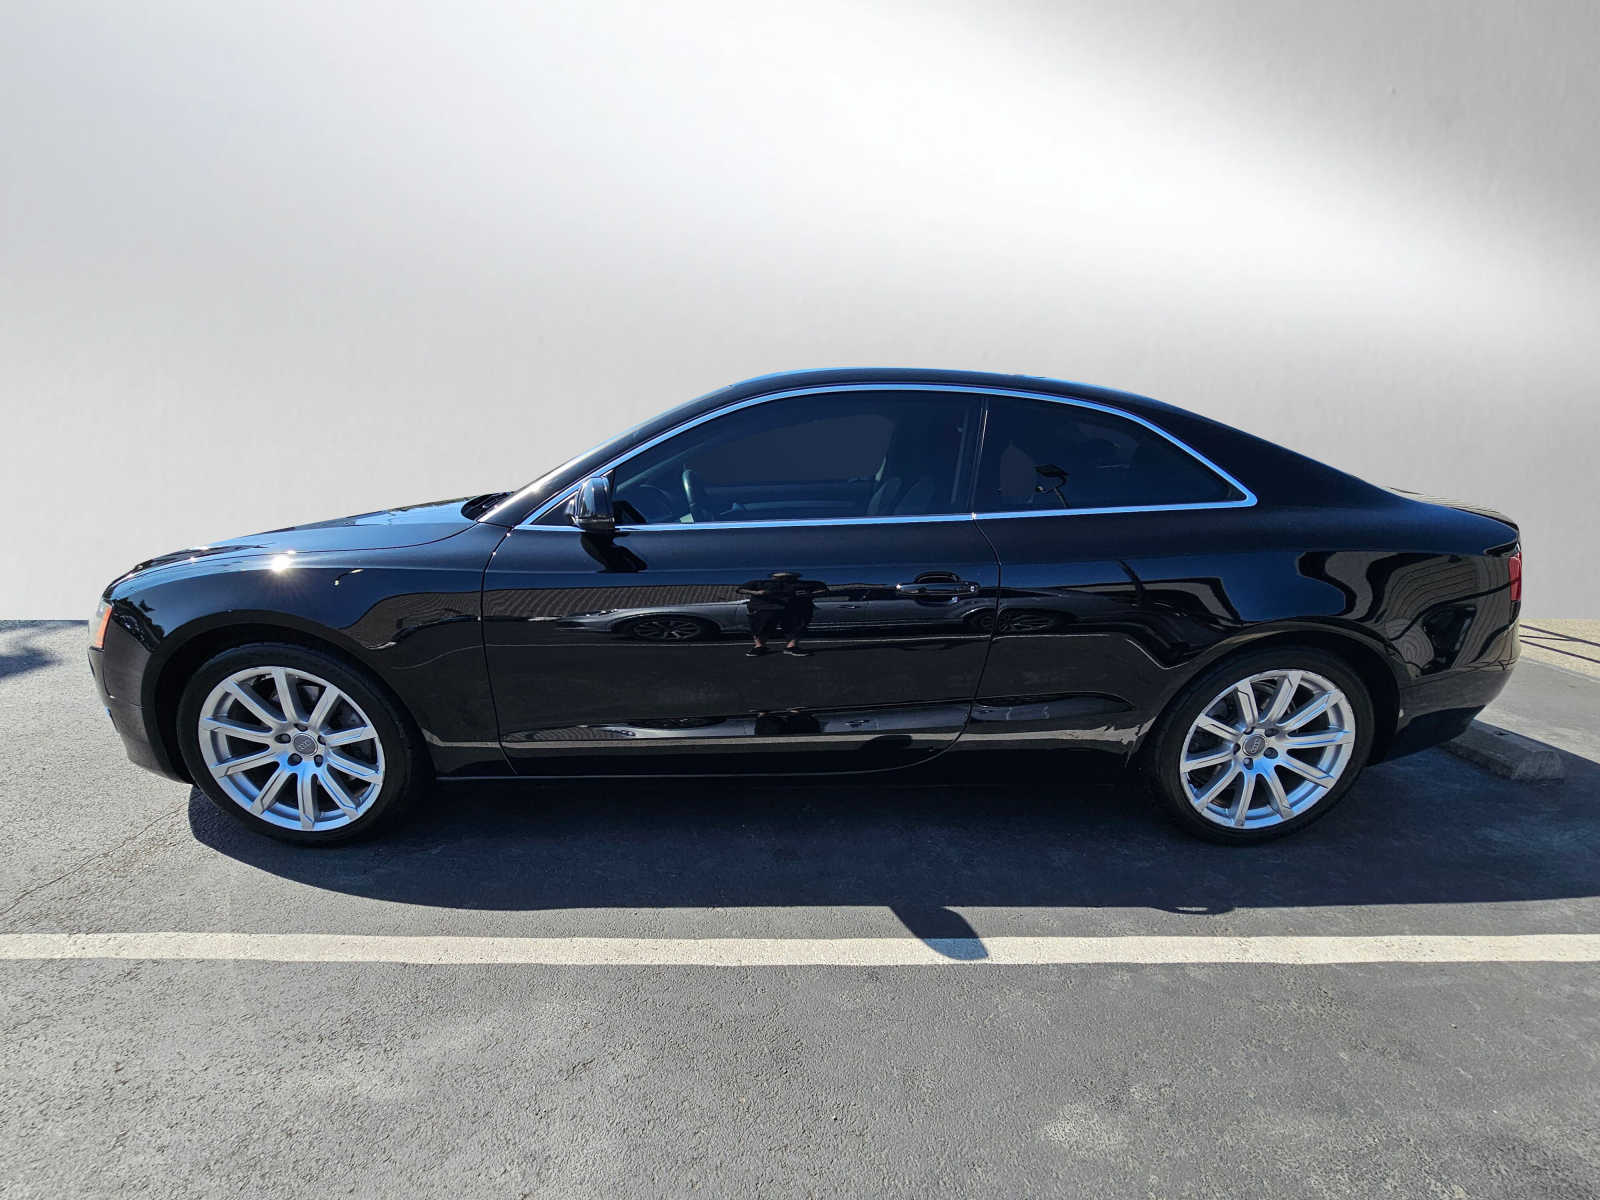 Used 2012 Audi A5 Premium with VIN WAULFAFR0CA004553 for sale in Bellingham, WA